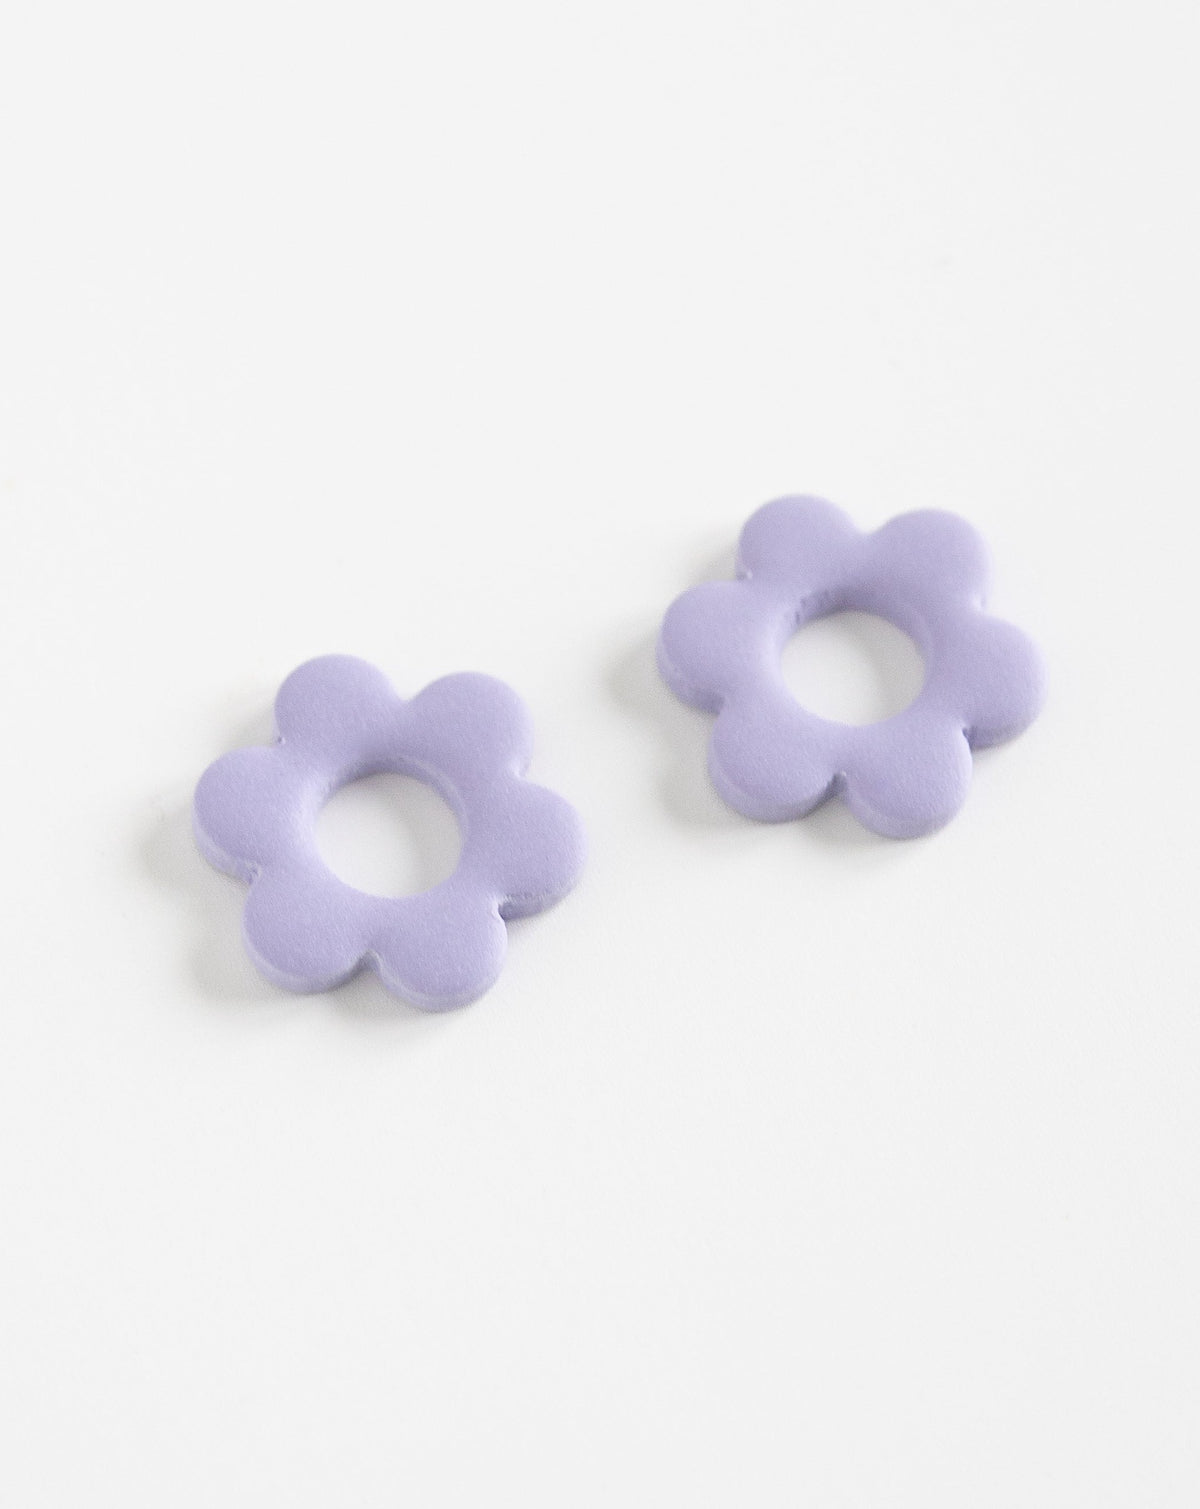 Goli Beads in Lilac color, angled view.